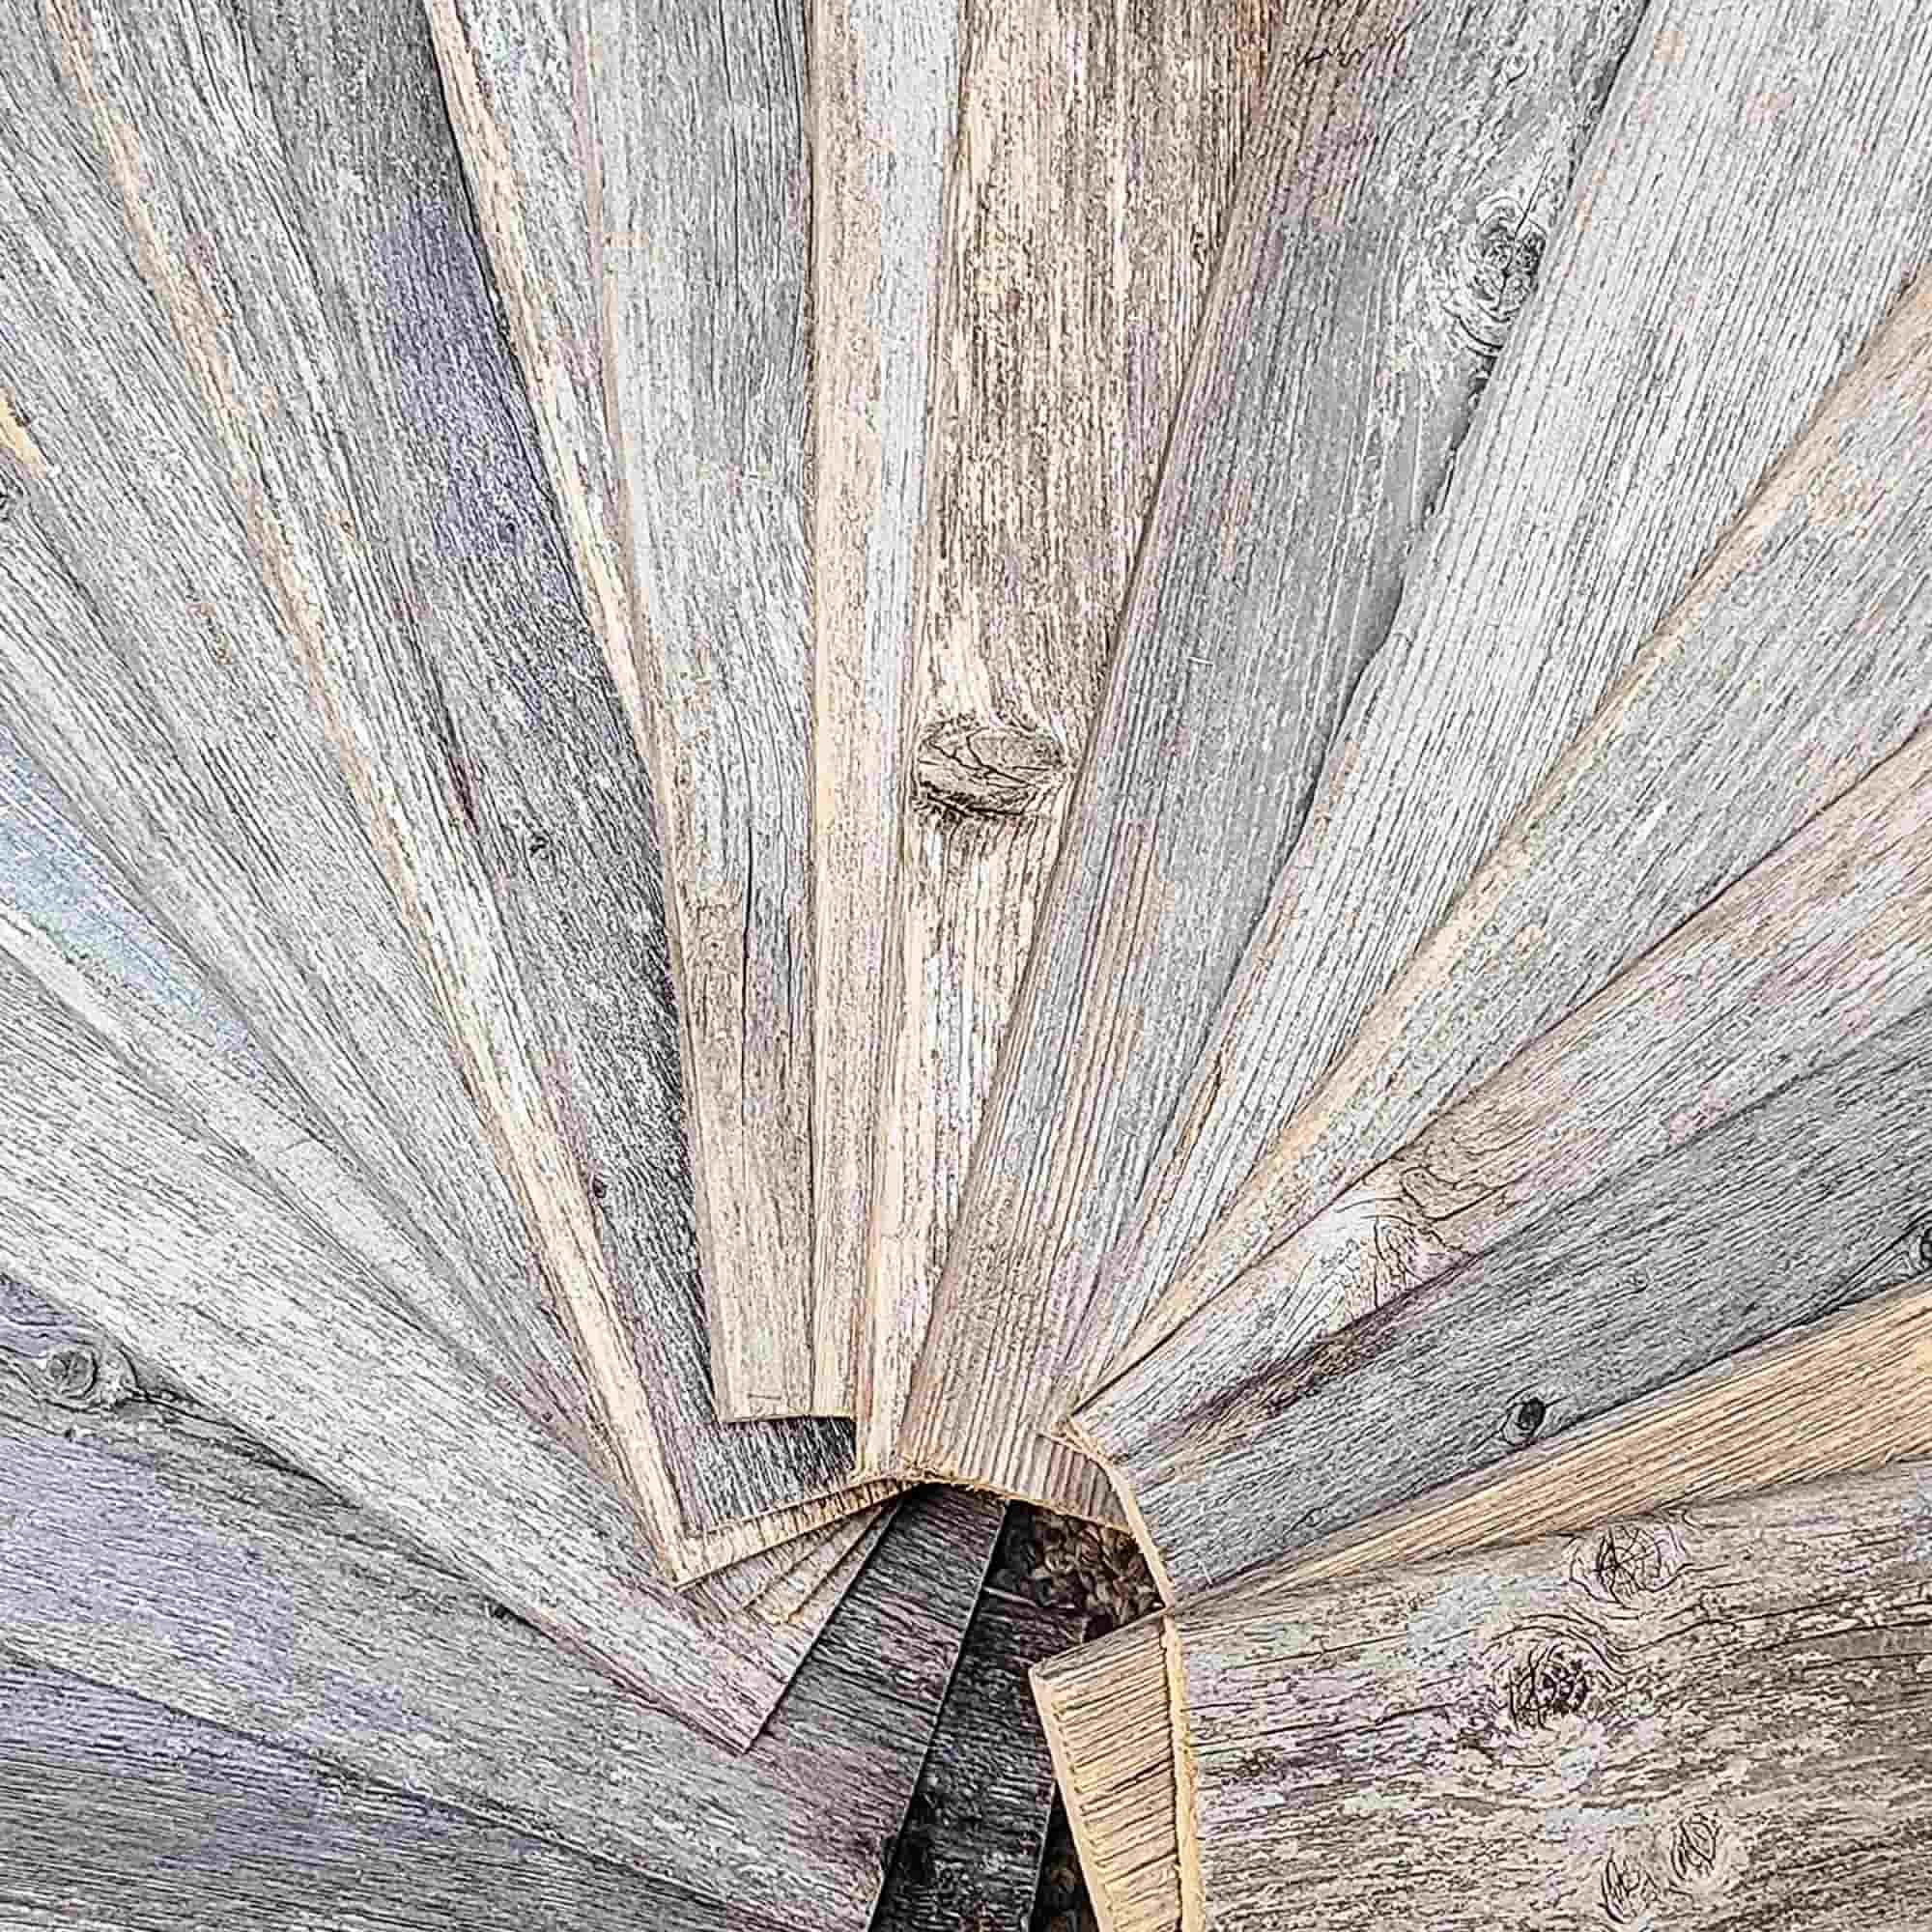  Rustic Weathered Reclaimed Wood Planks for DIY Crafts